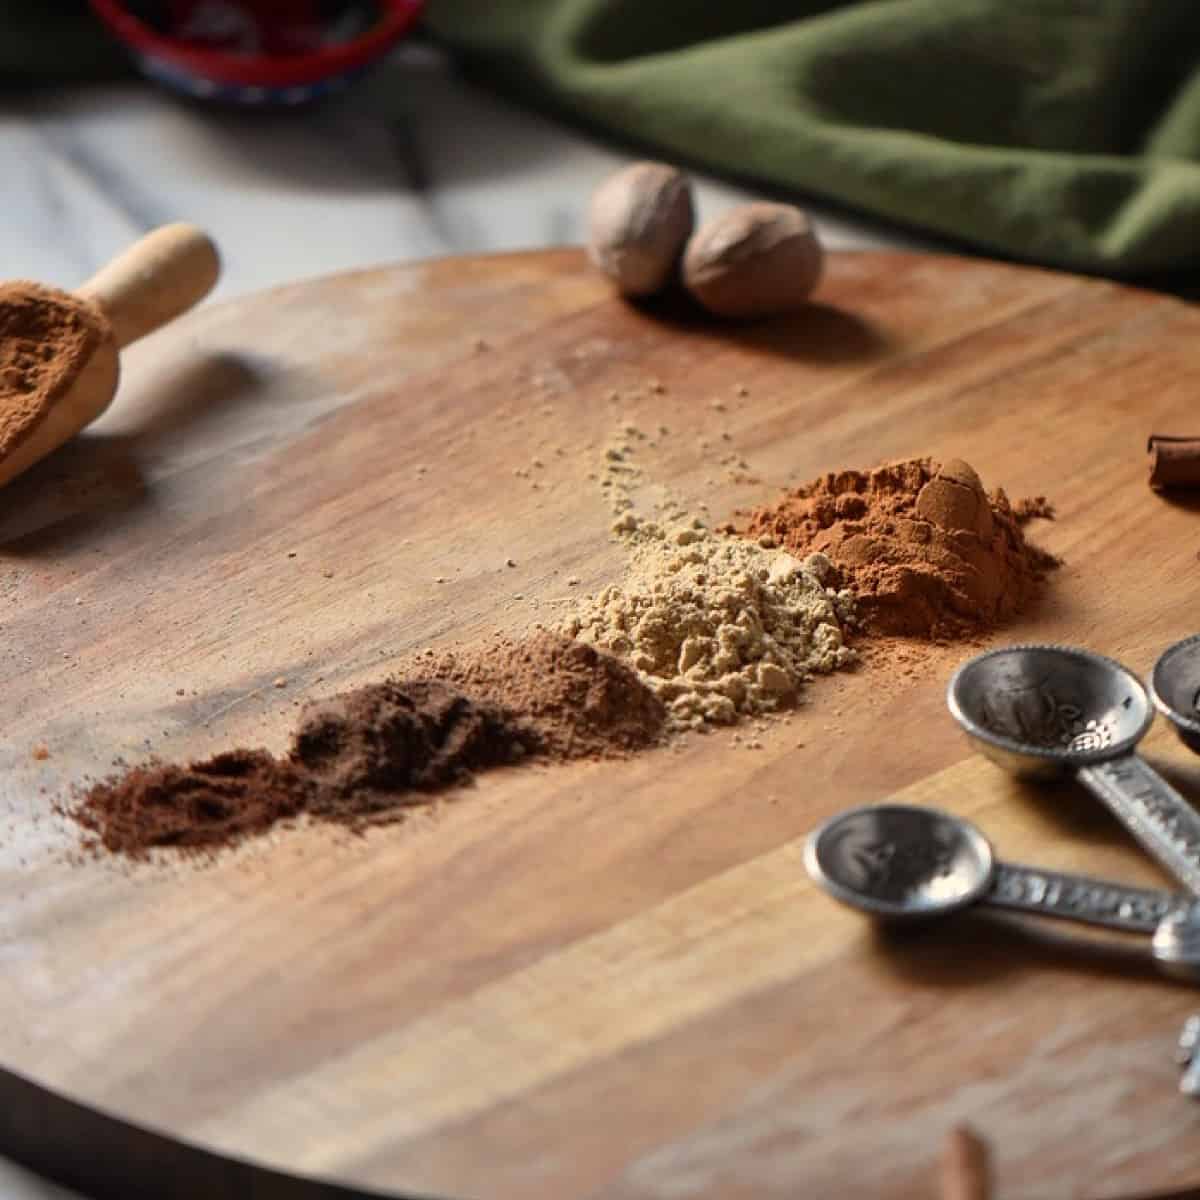 Pumpkin Spice aka Pumpkin Pie Spice is simply made by combining cinnamon, ginger, nutmeg, allspice and cloves. The perfect spice for fall baking!